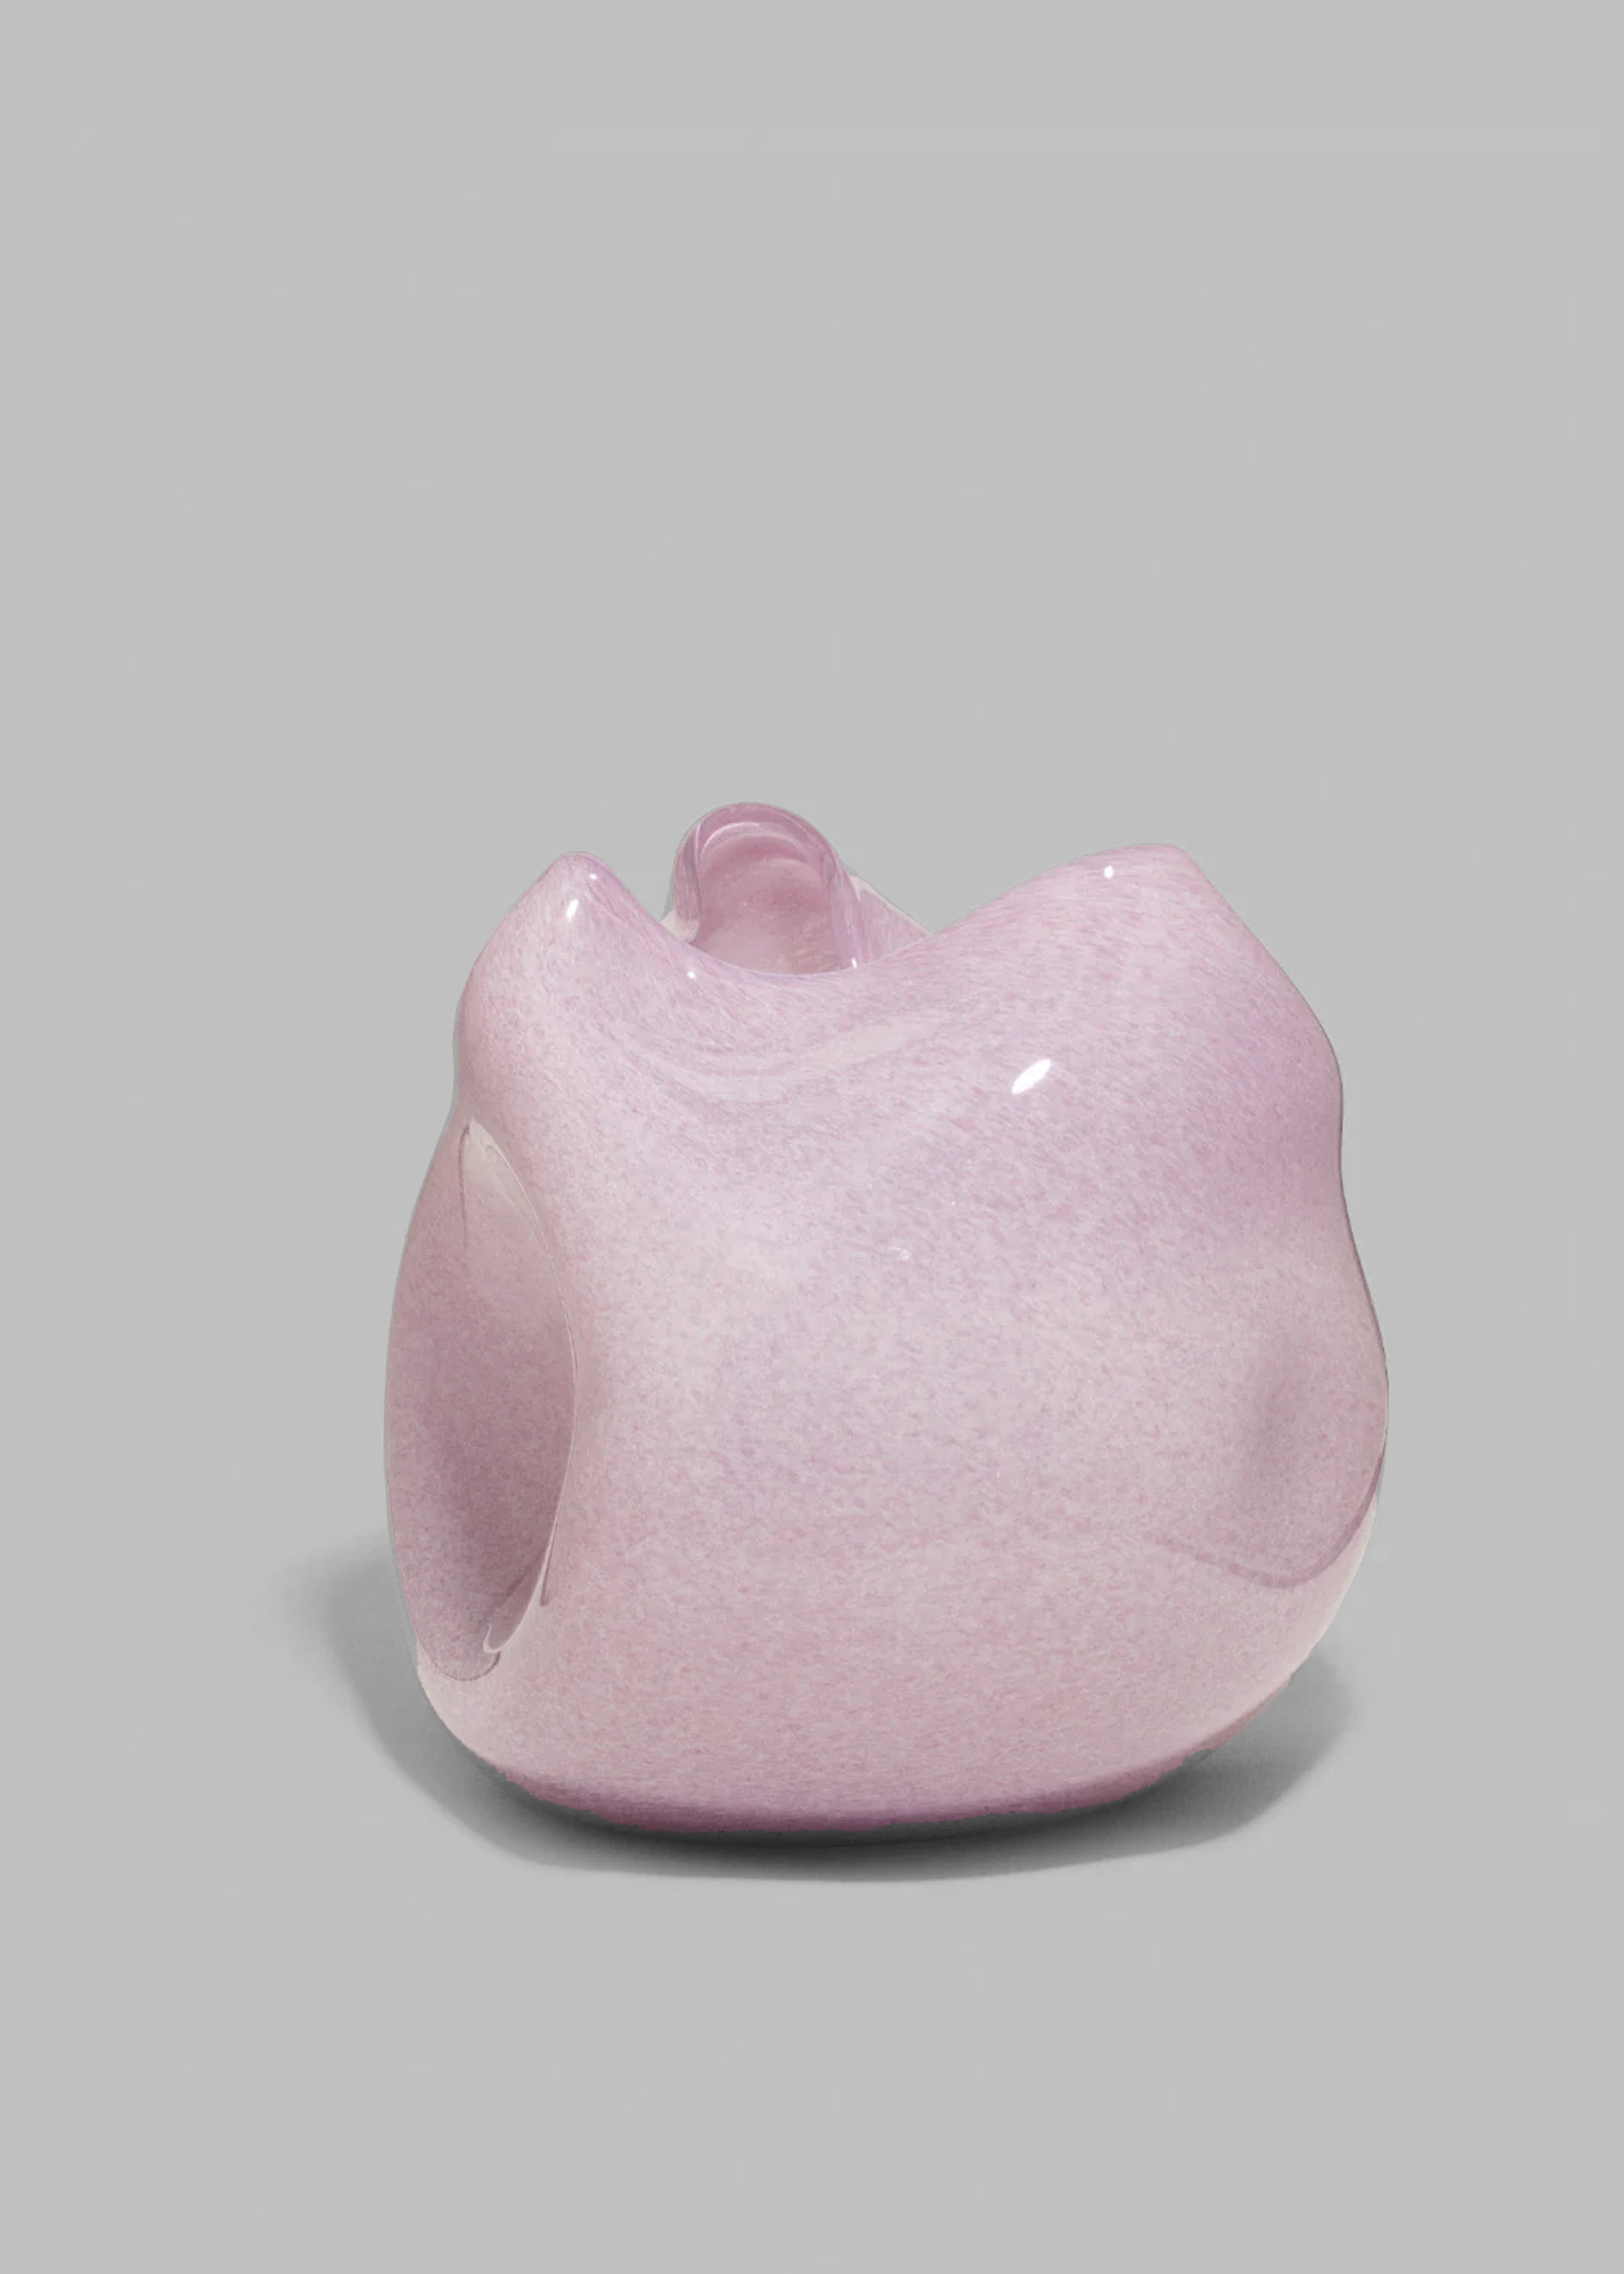 Completedworks The Bubble to End All Bubbles Vase - Lilac - 2